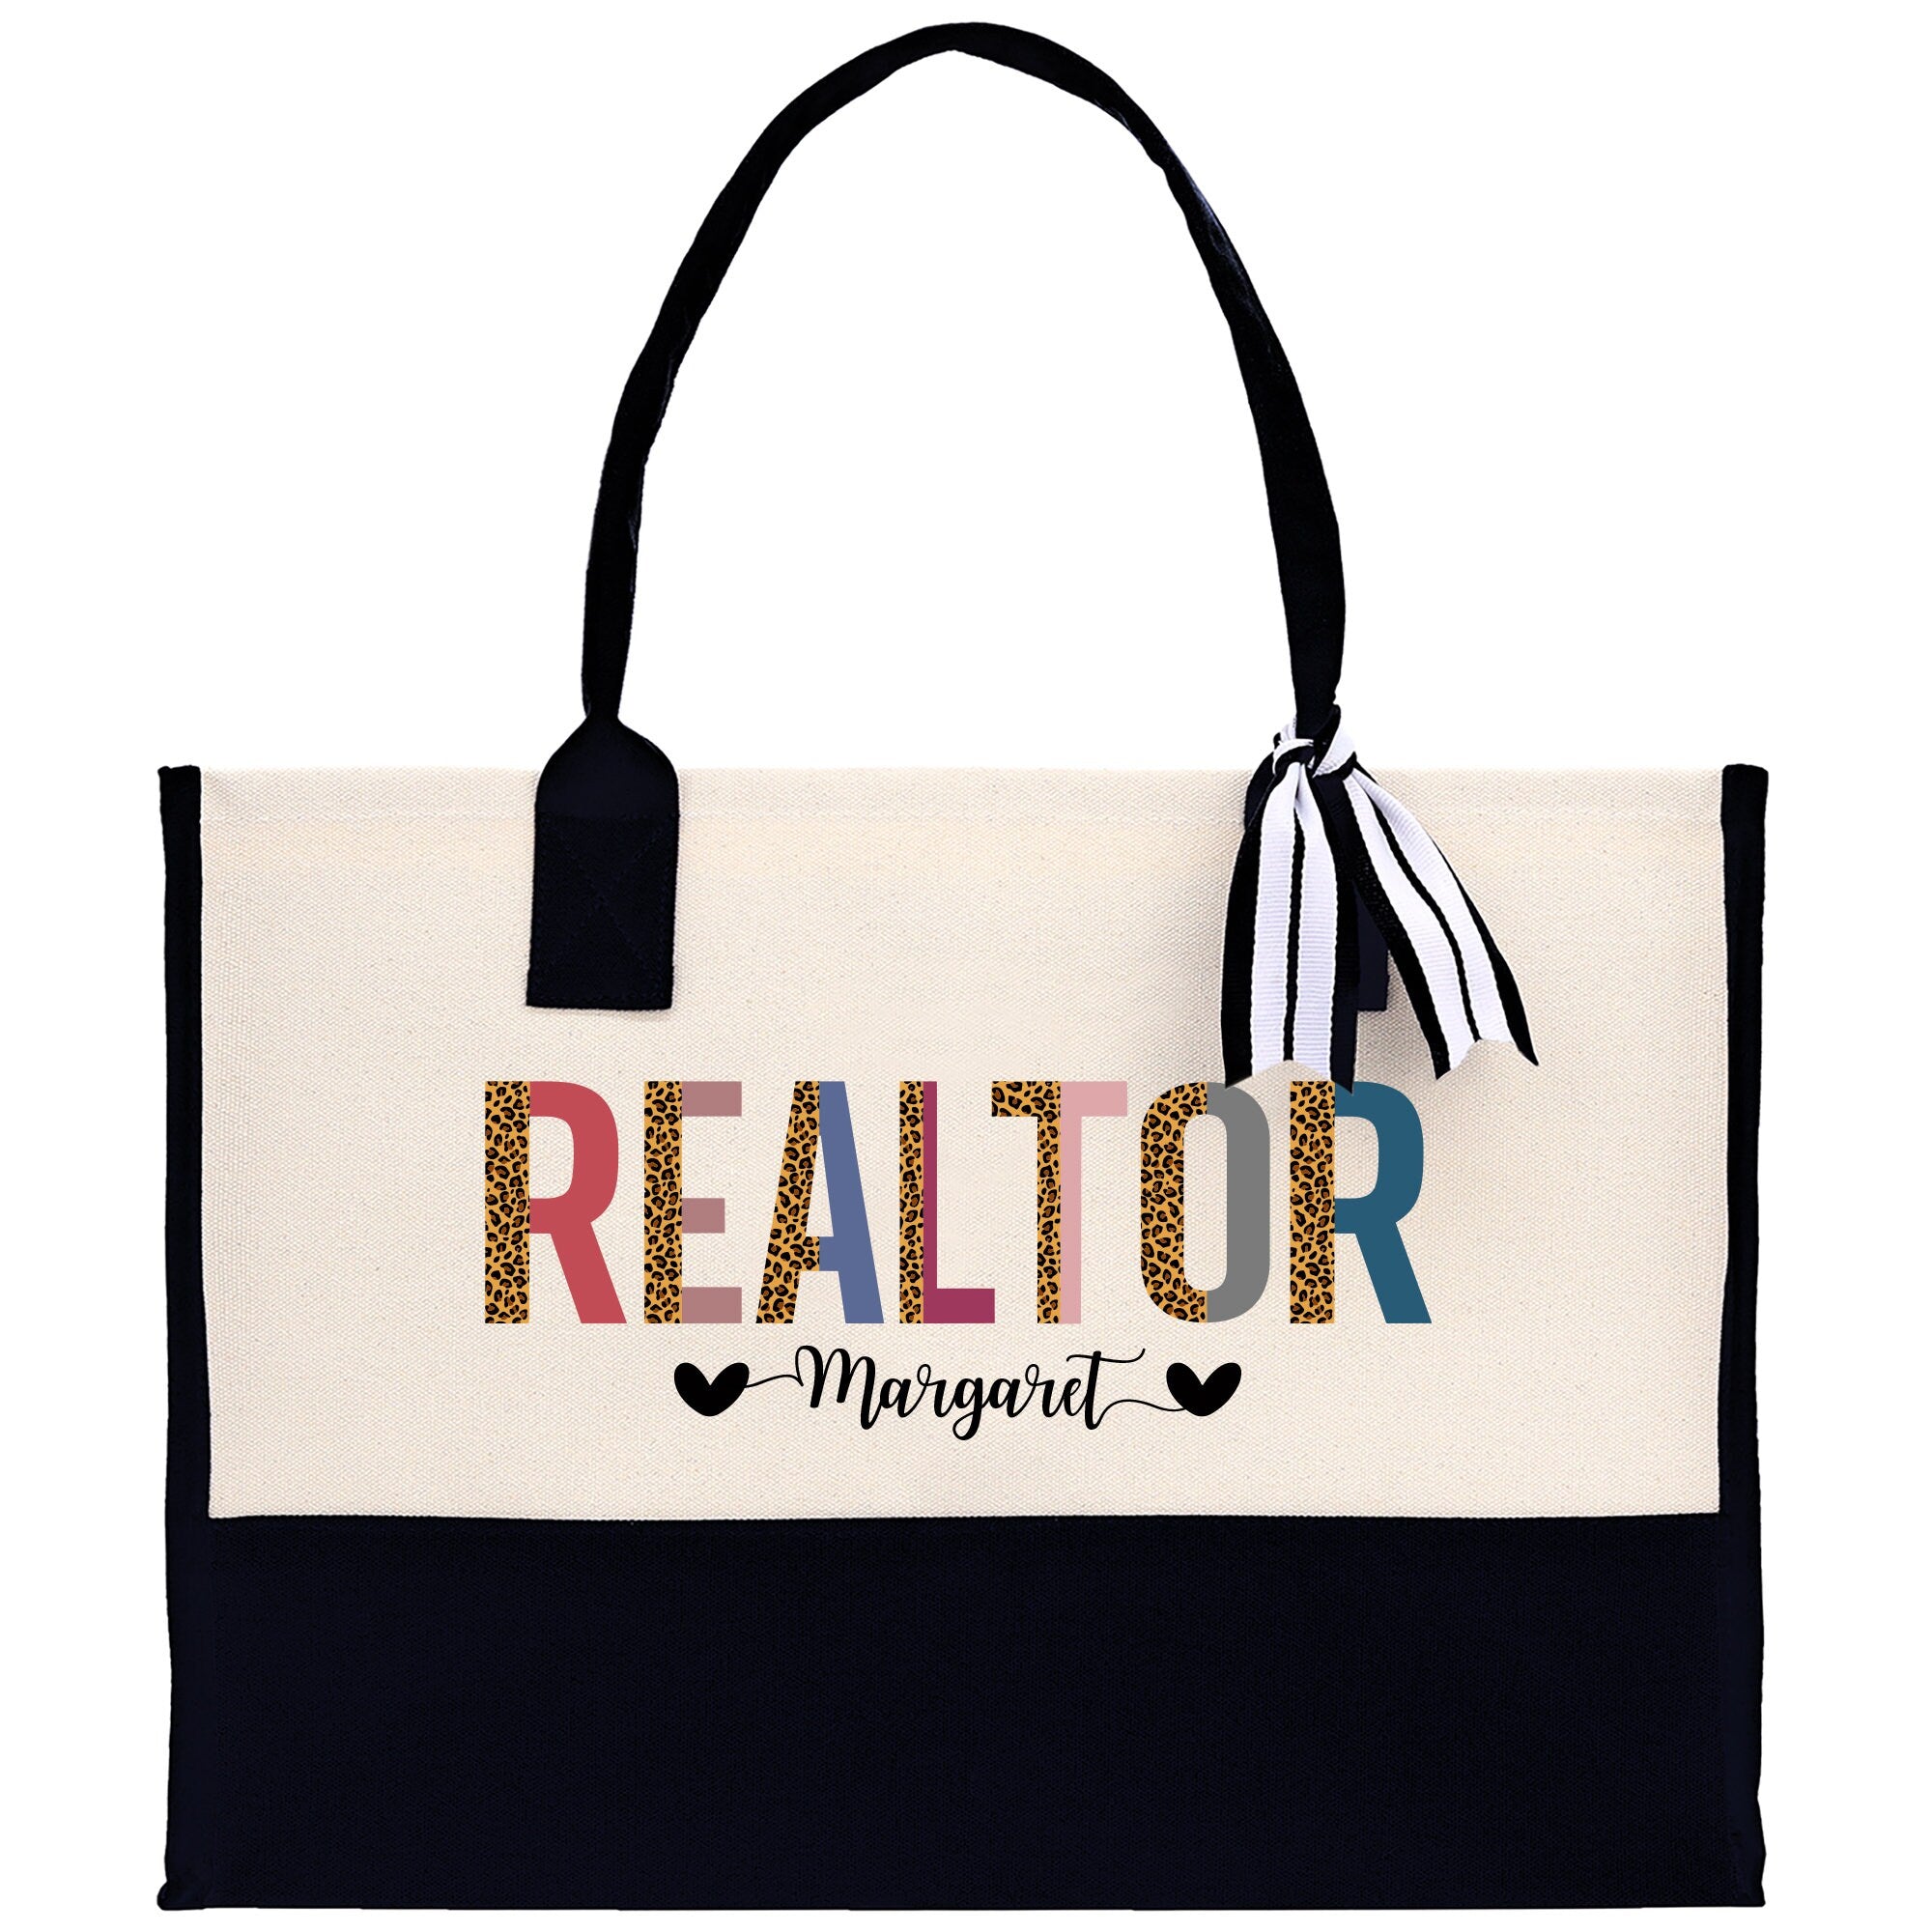 a white and black bag with the word realtor on it